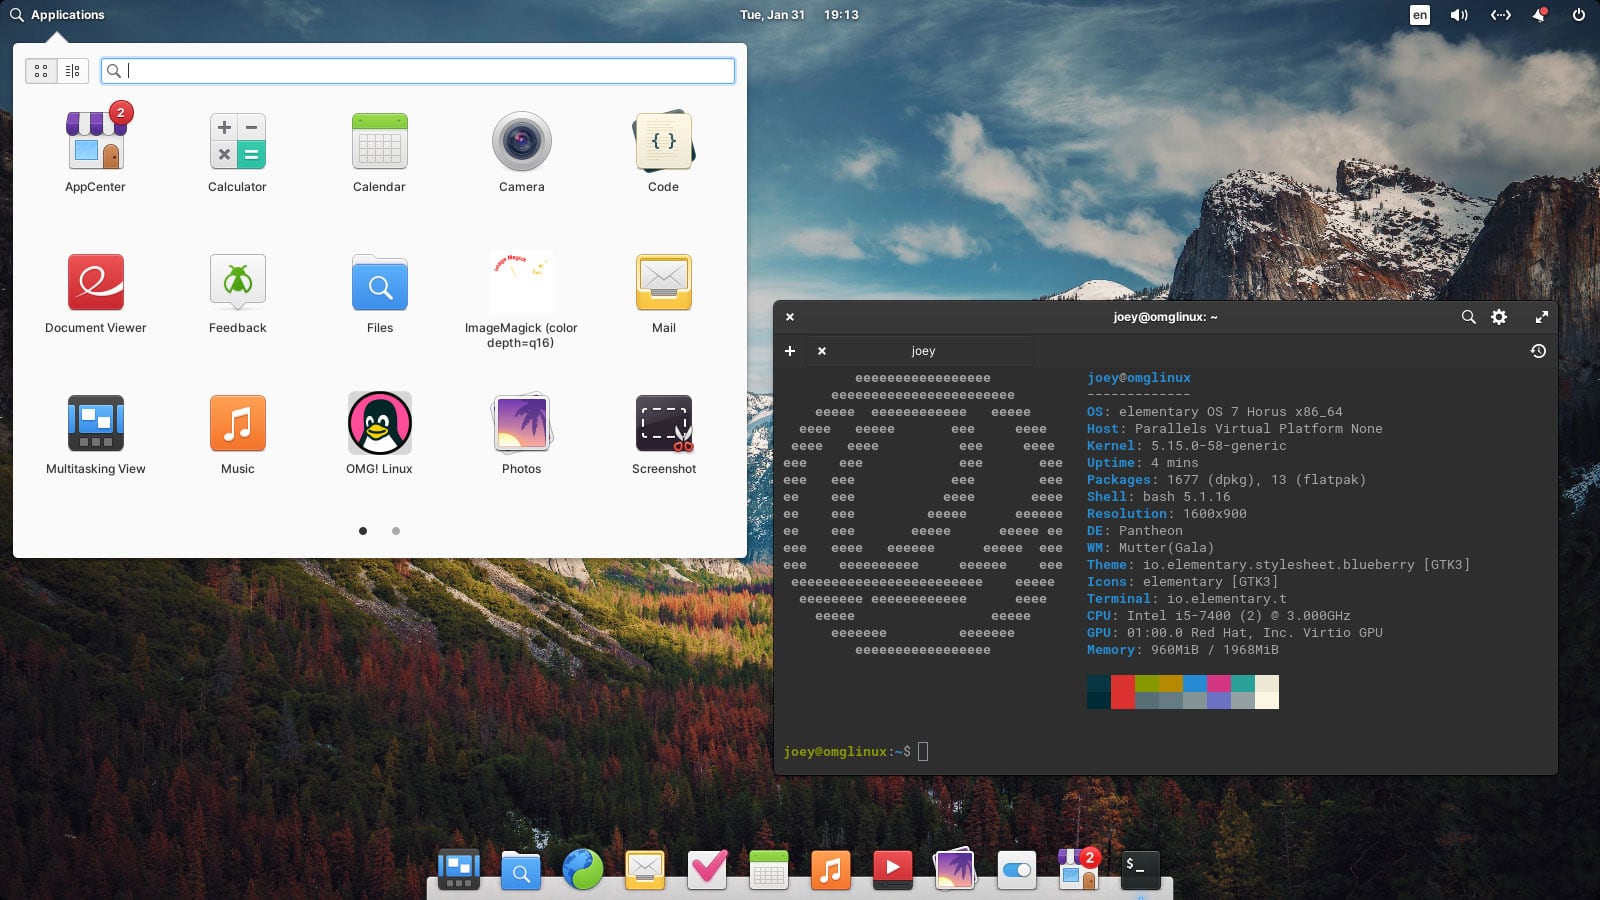 a screenshot showing the slingshot application launcher in elementary OS 7, plus the terminal app